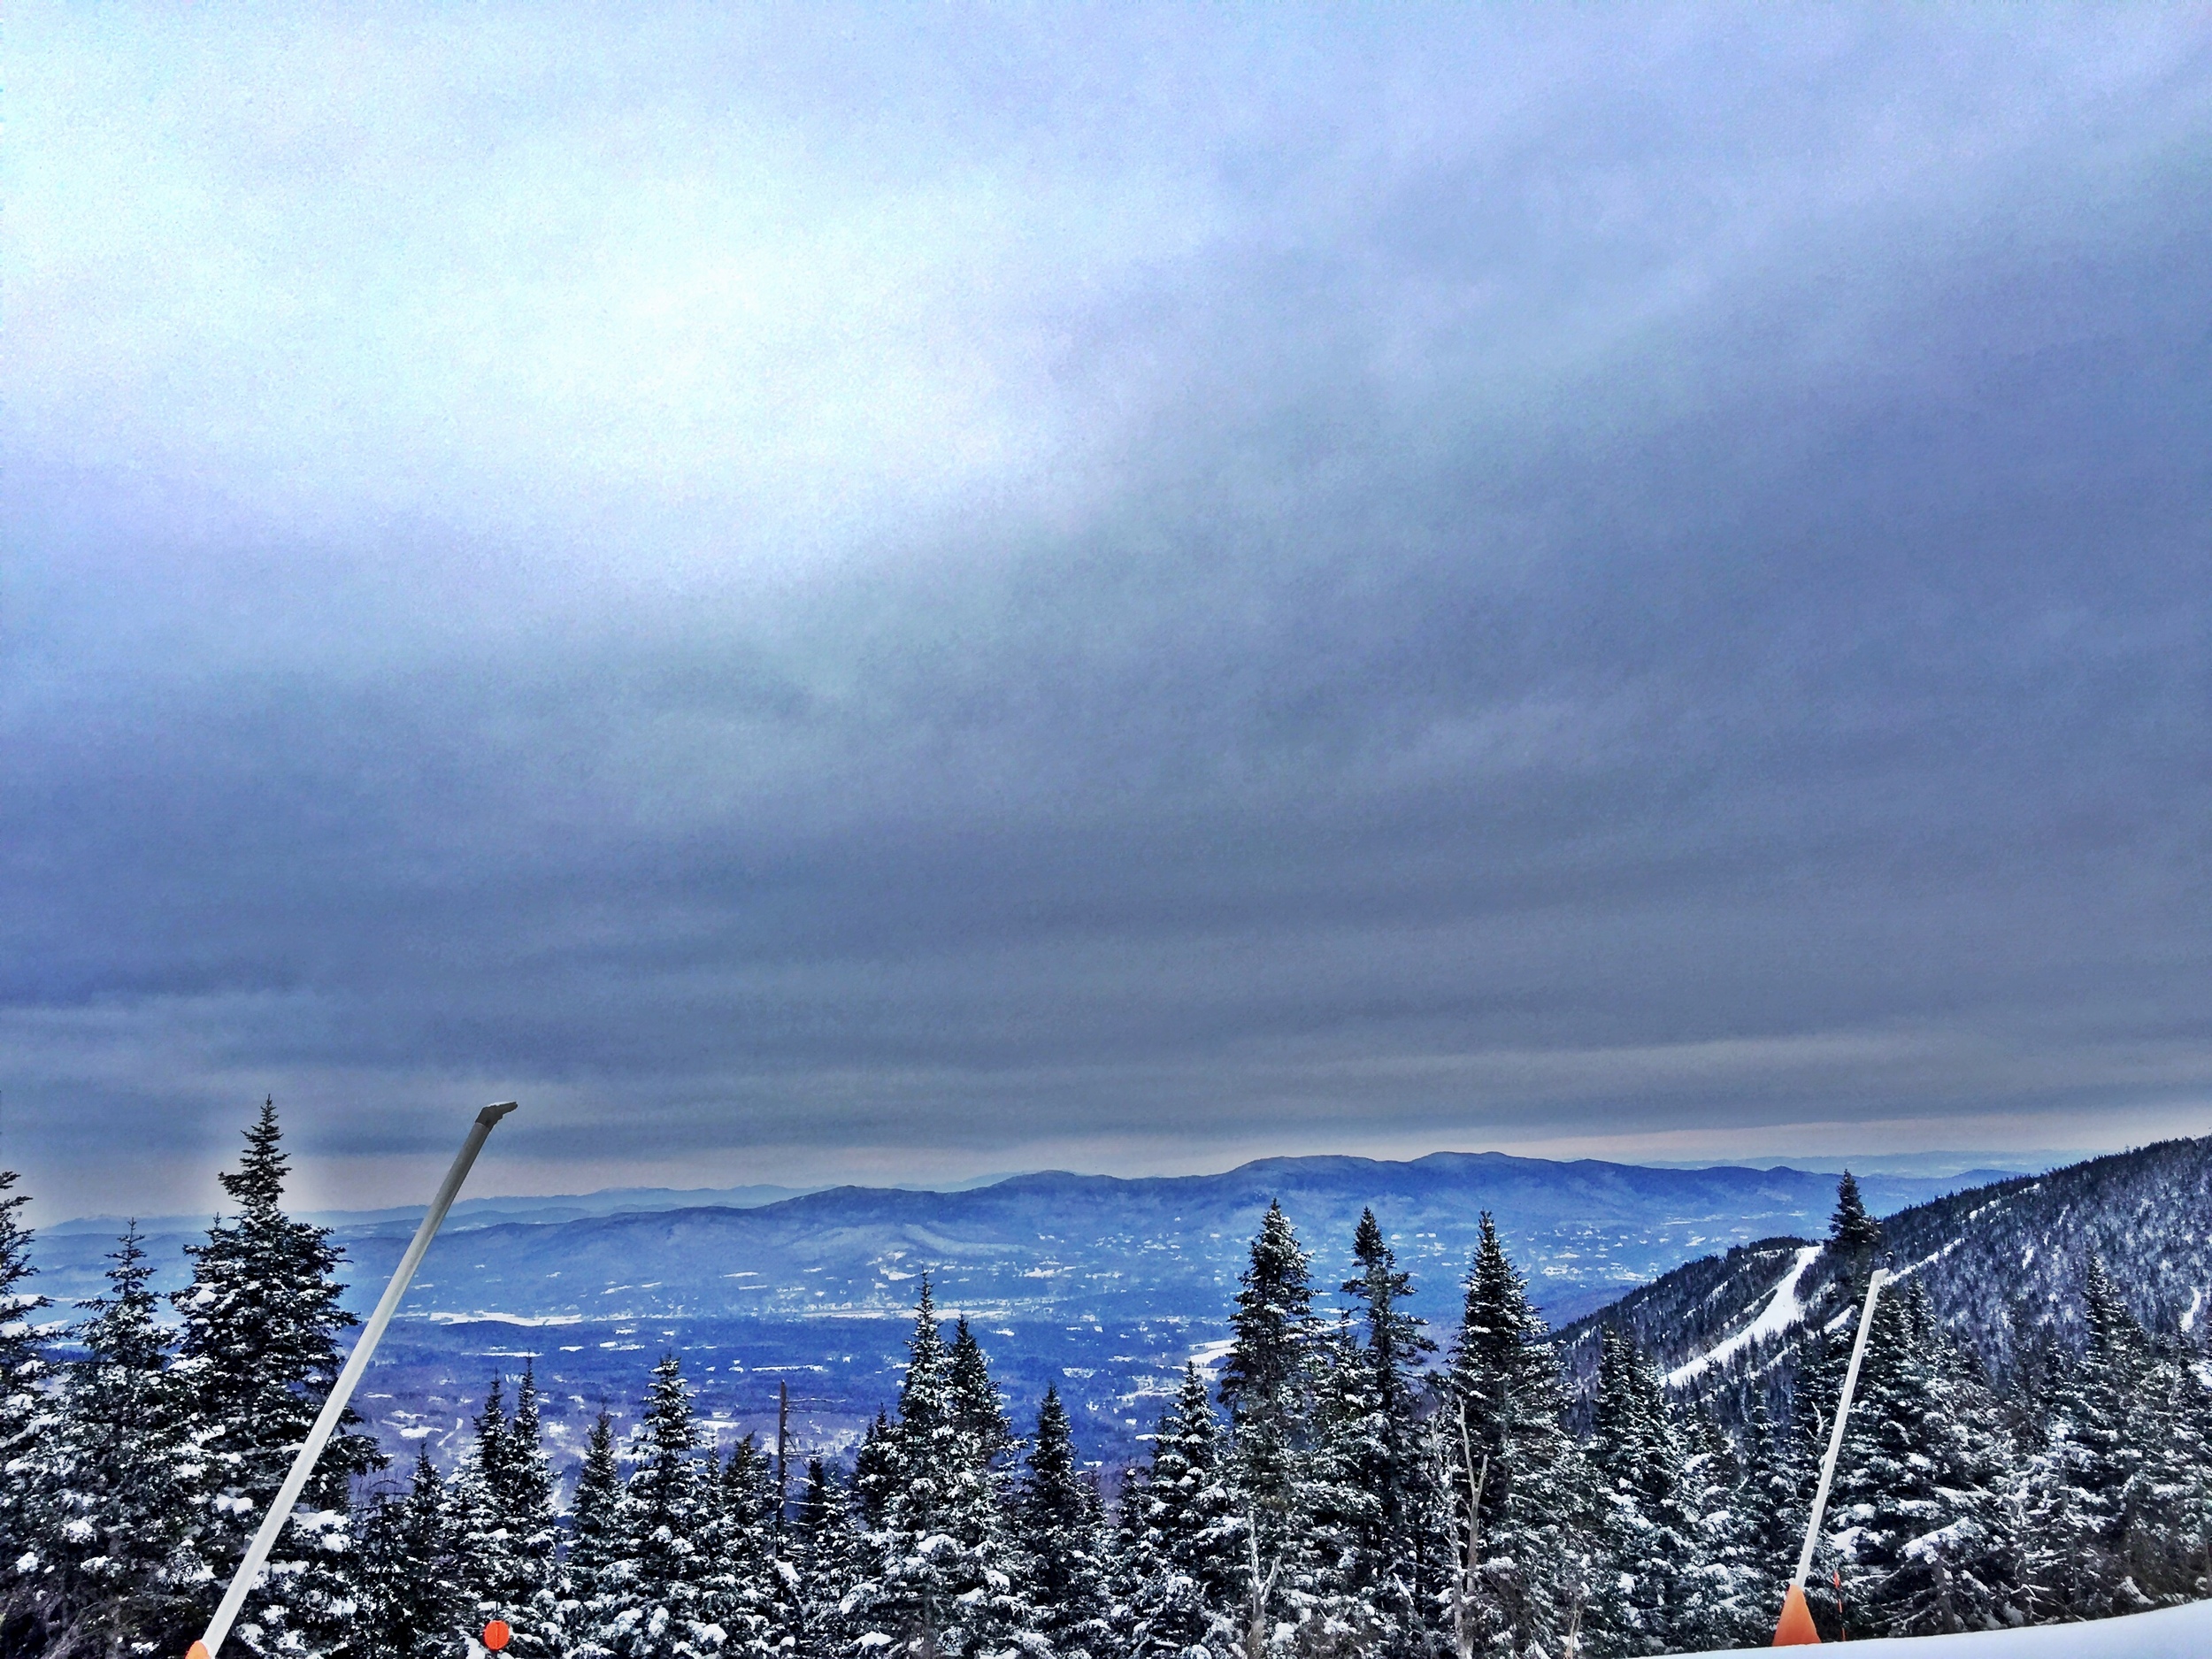 Grungy Slopes, Stowe Vermont, Stowe Mountain Lodge 21.jpg